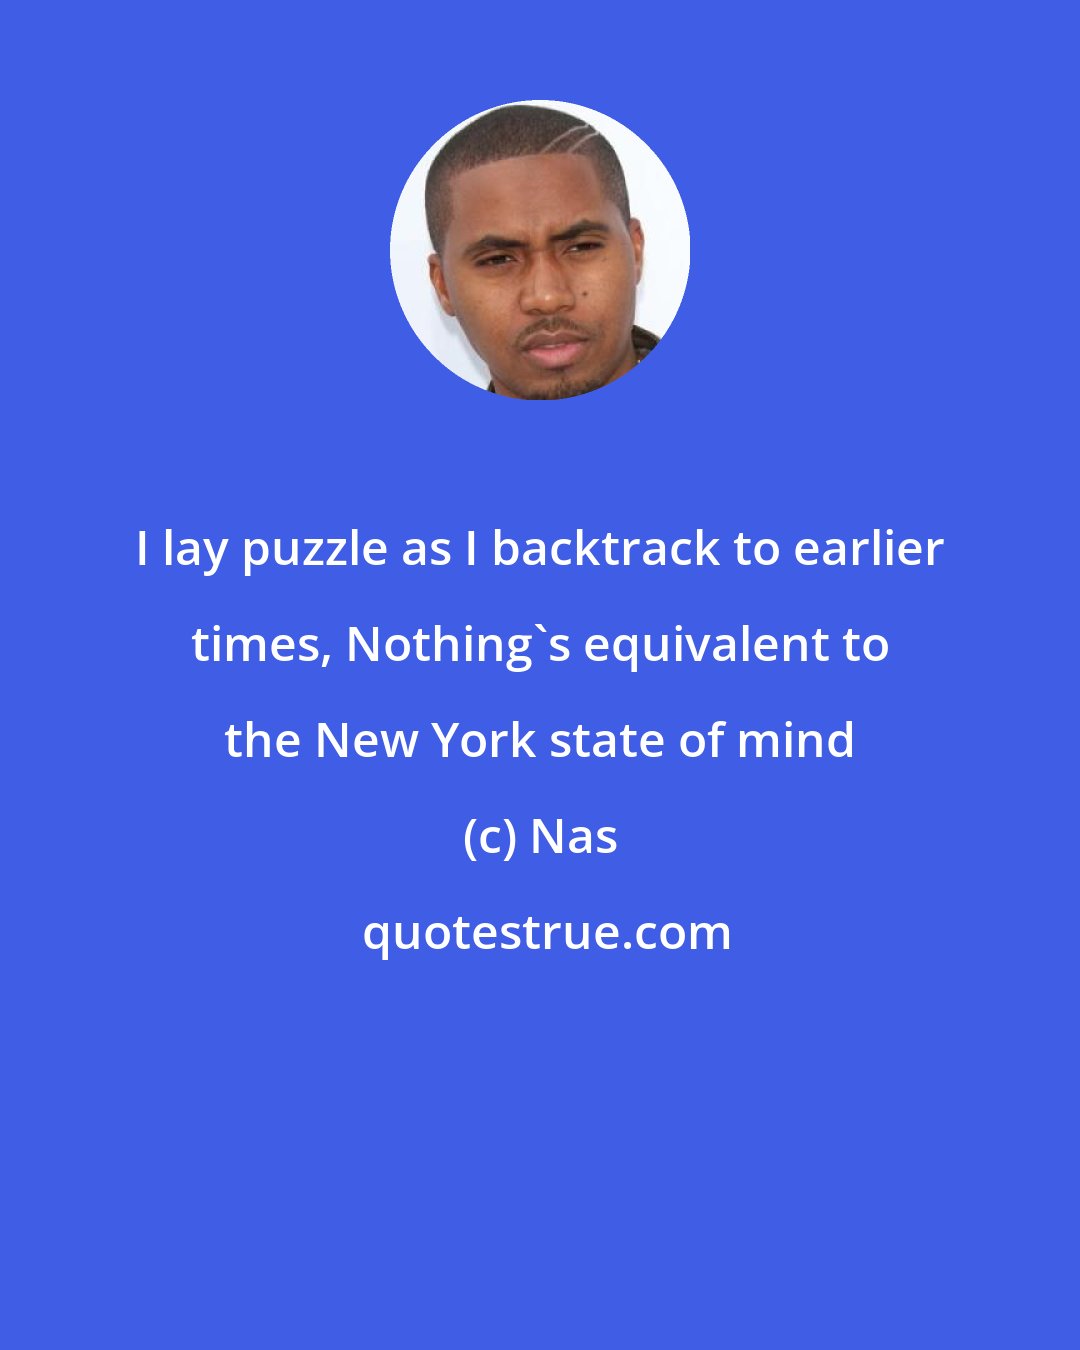 Nas: I lay puzzle as I backtrack to earlier times, Nothing's equivalent to the New York state of mind